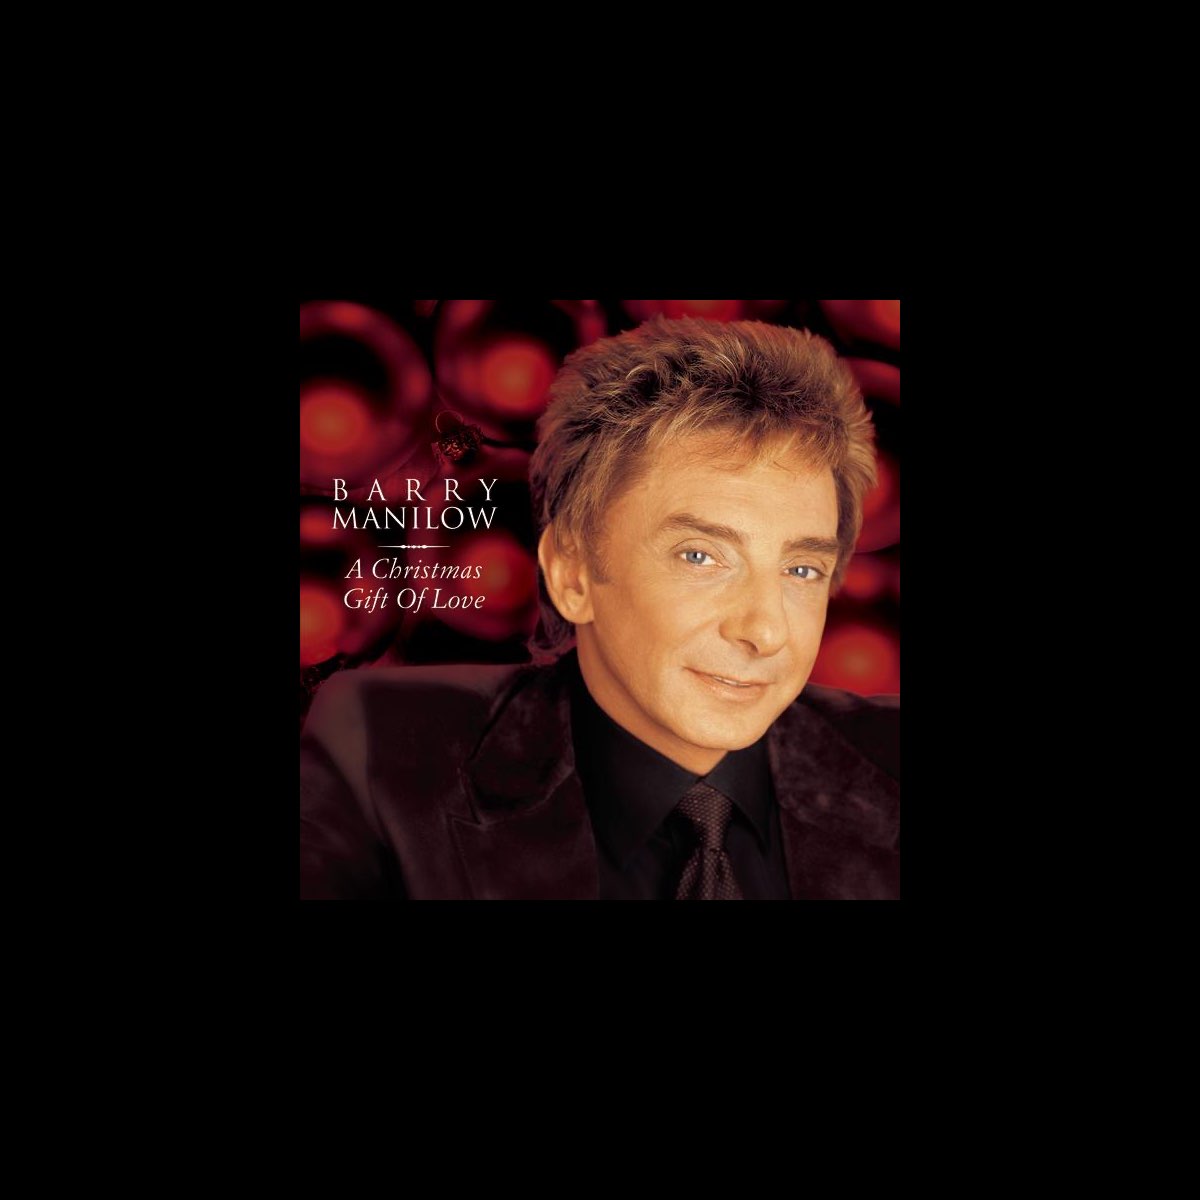 ‎A Christmas Gift of Love by Barry Manilow on Apple Music